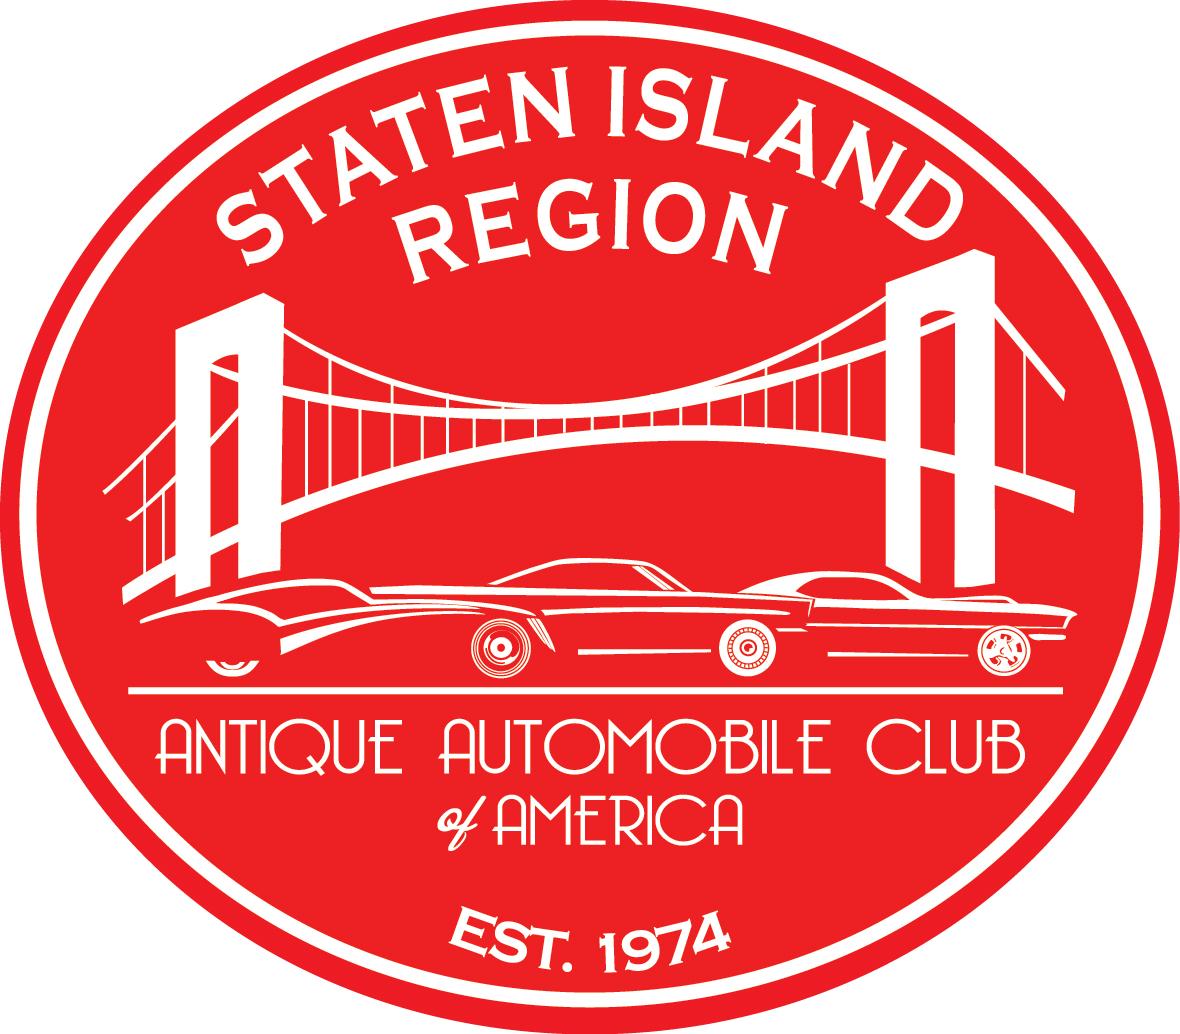 96 Latest Staten island antique car show for Android Wallpaper